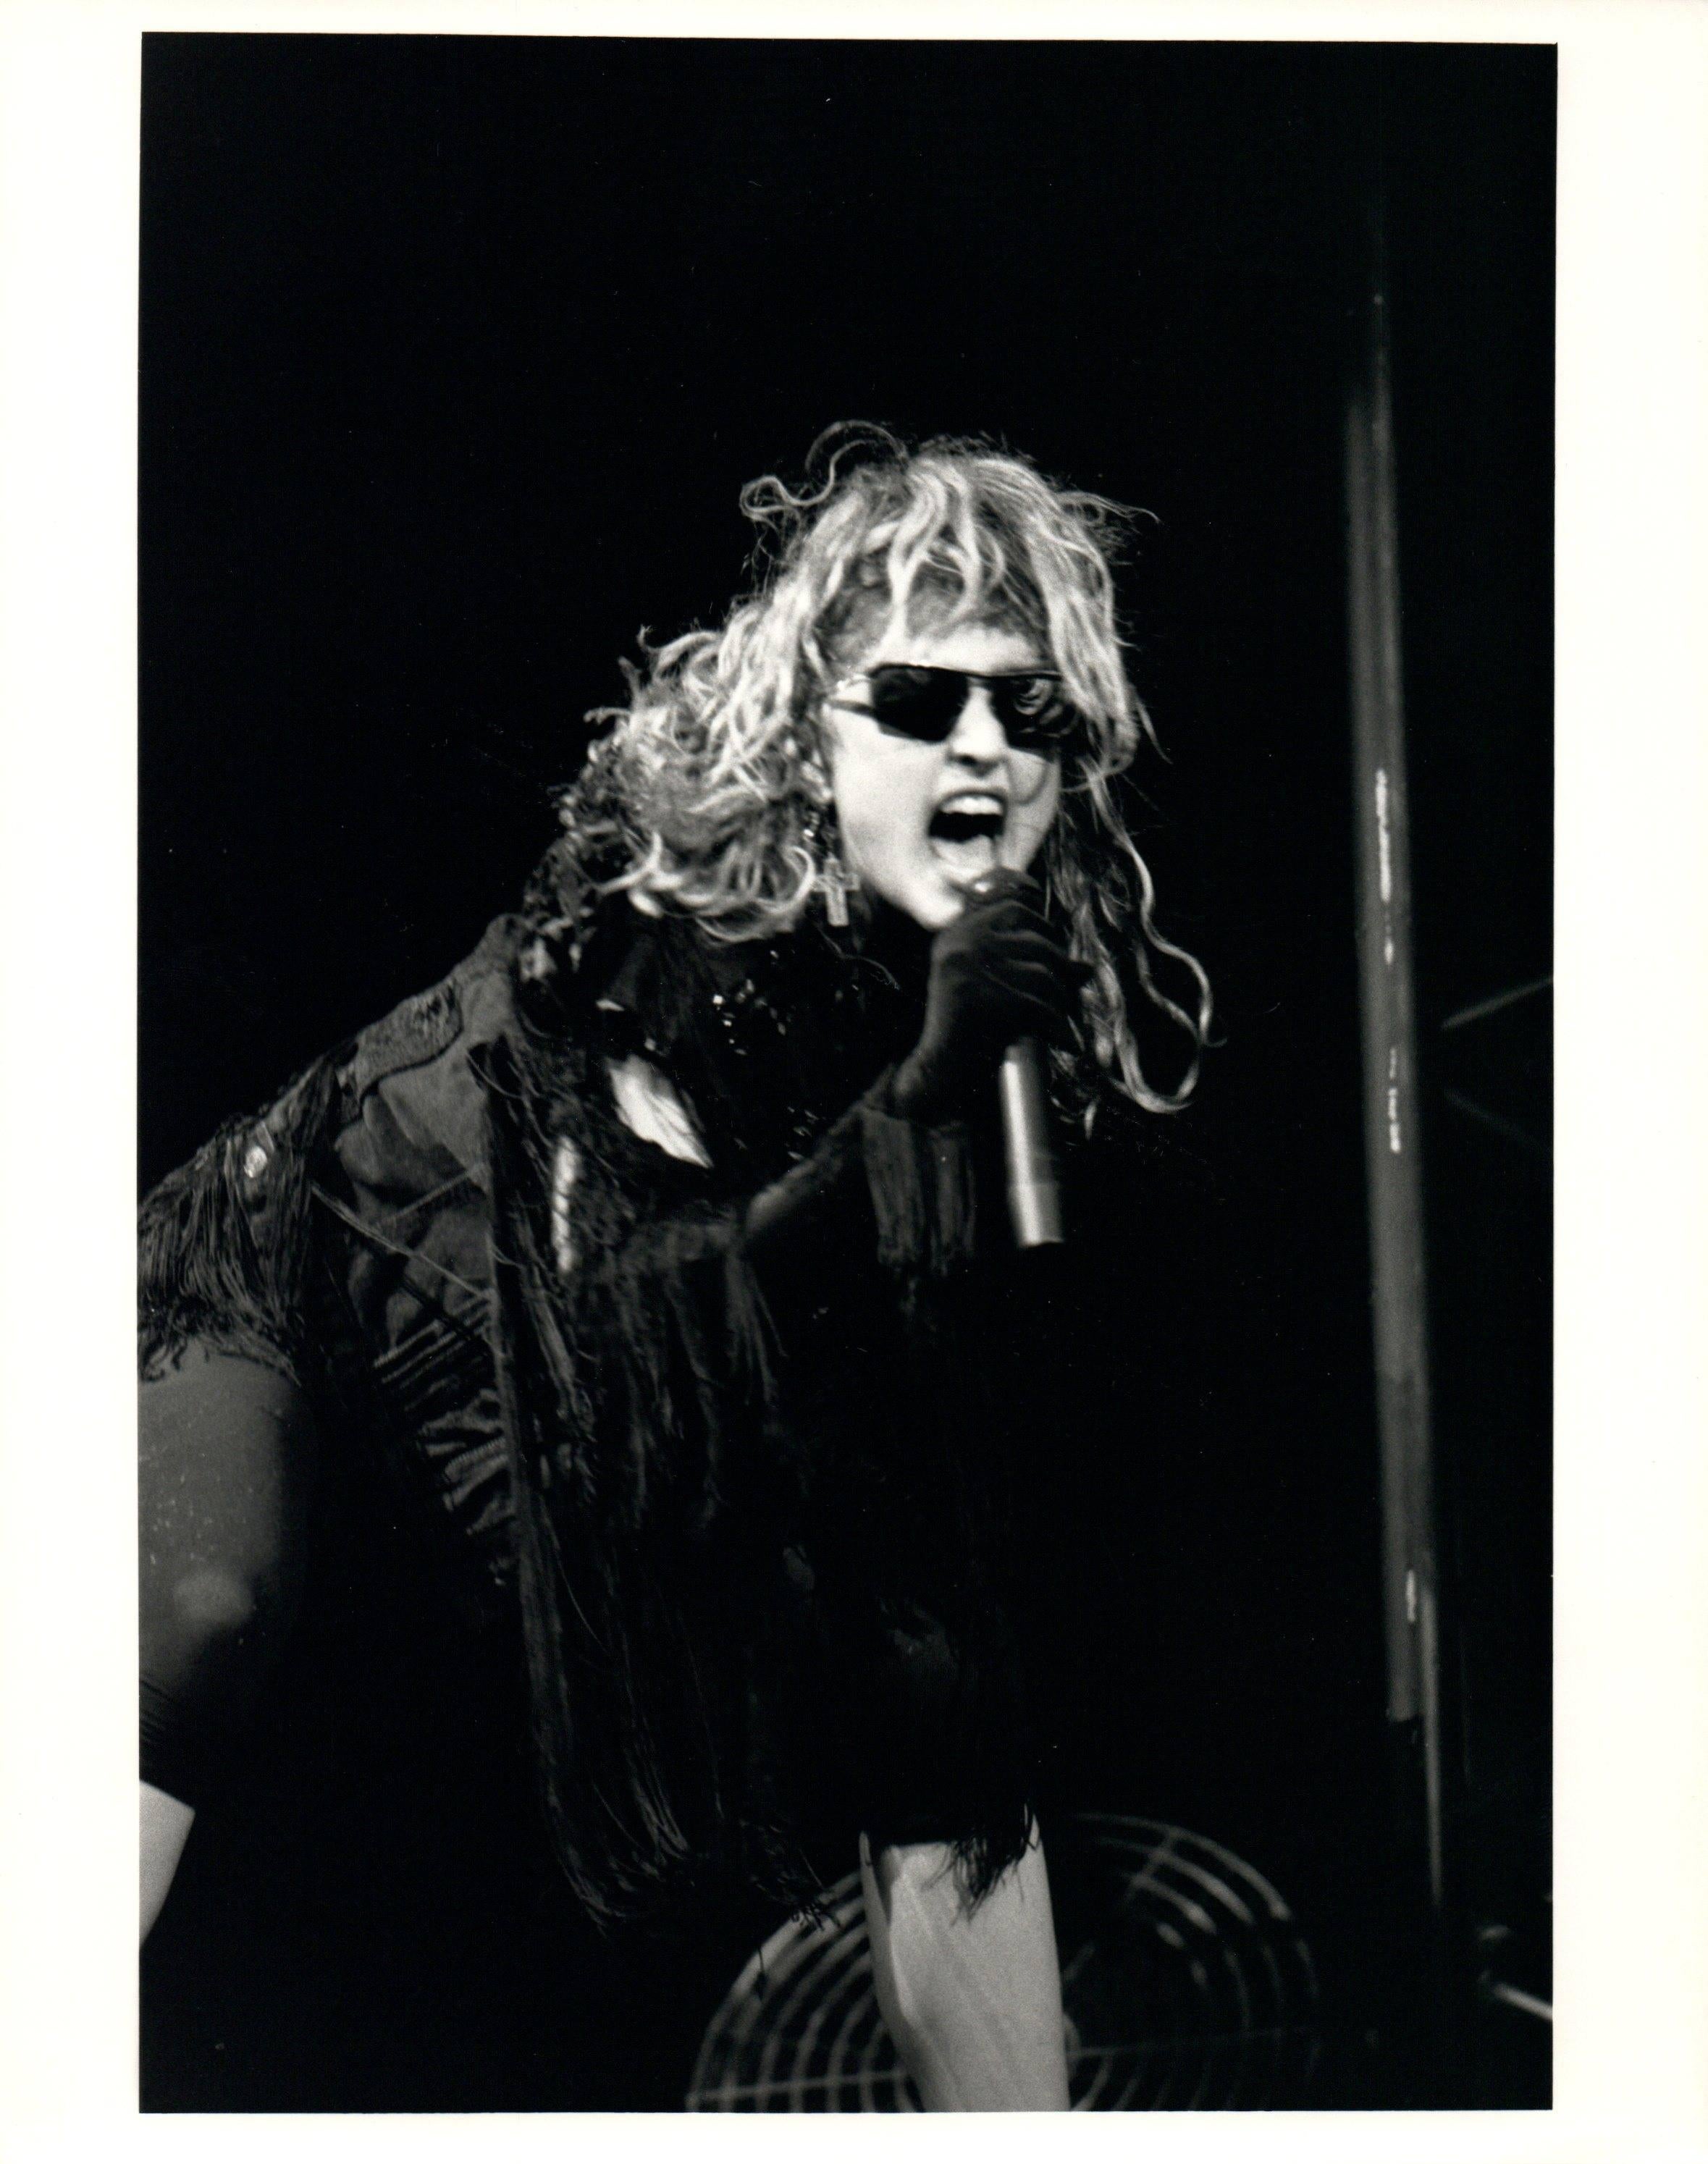 Unknown Portrait Photograph - Madonna Performing on Stage in Sunglasses Vintage Original Photograph